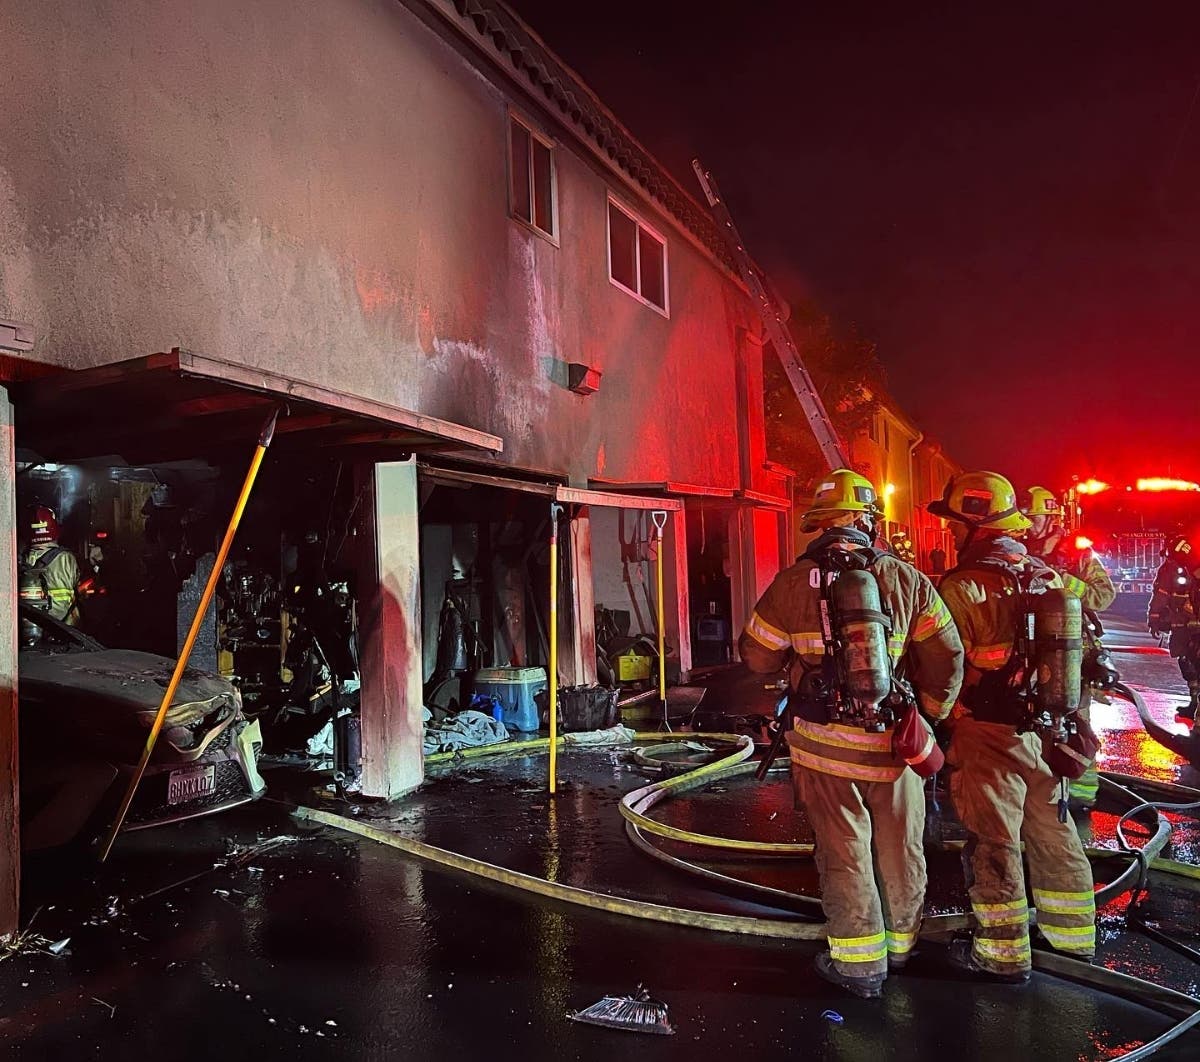 A garage fire was knocked out in San Juan Capistrano Tuesday morning after a good samaritan saw the fire and quickly reported it to residents.